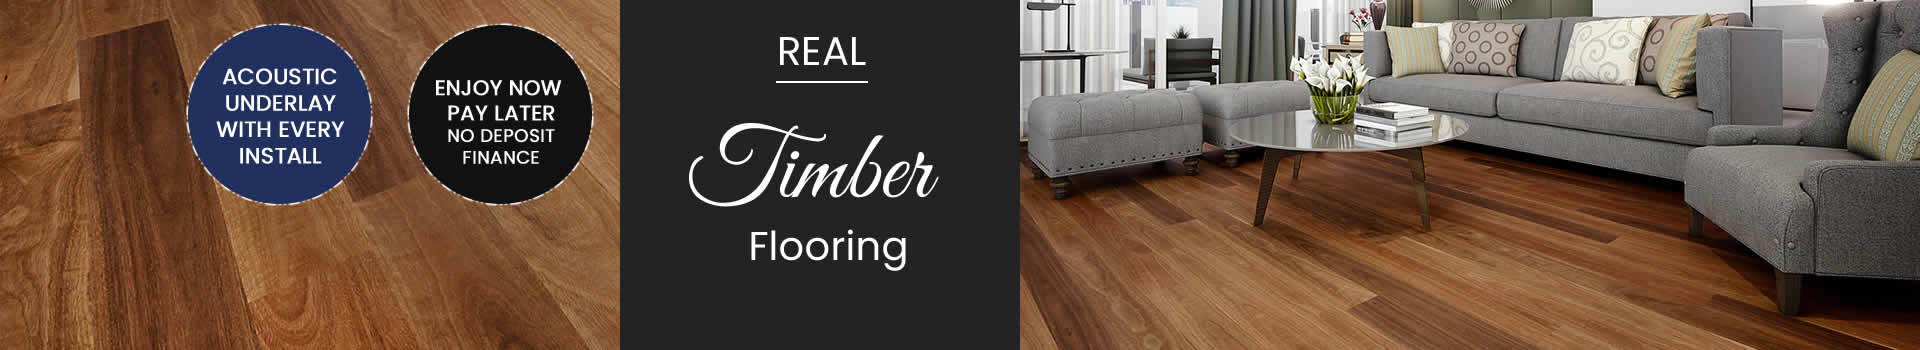 timber flooring products online